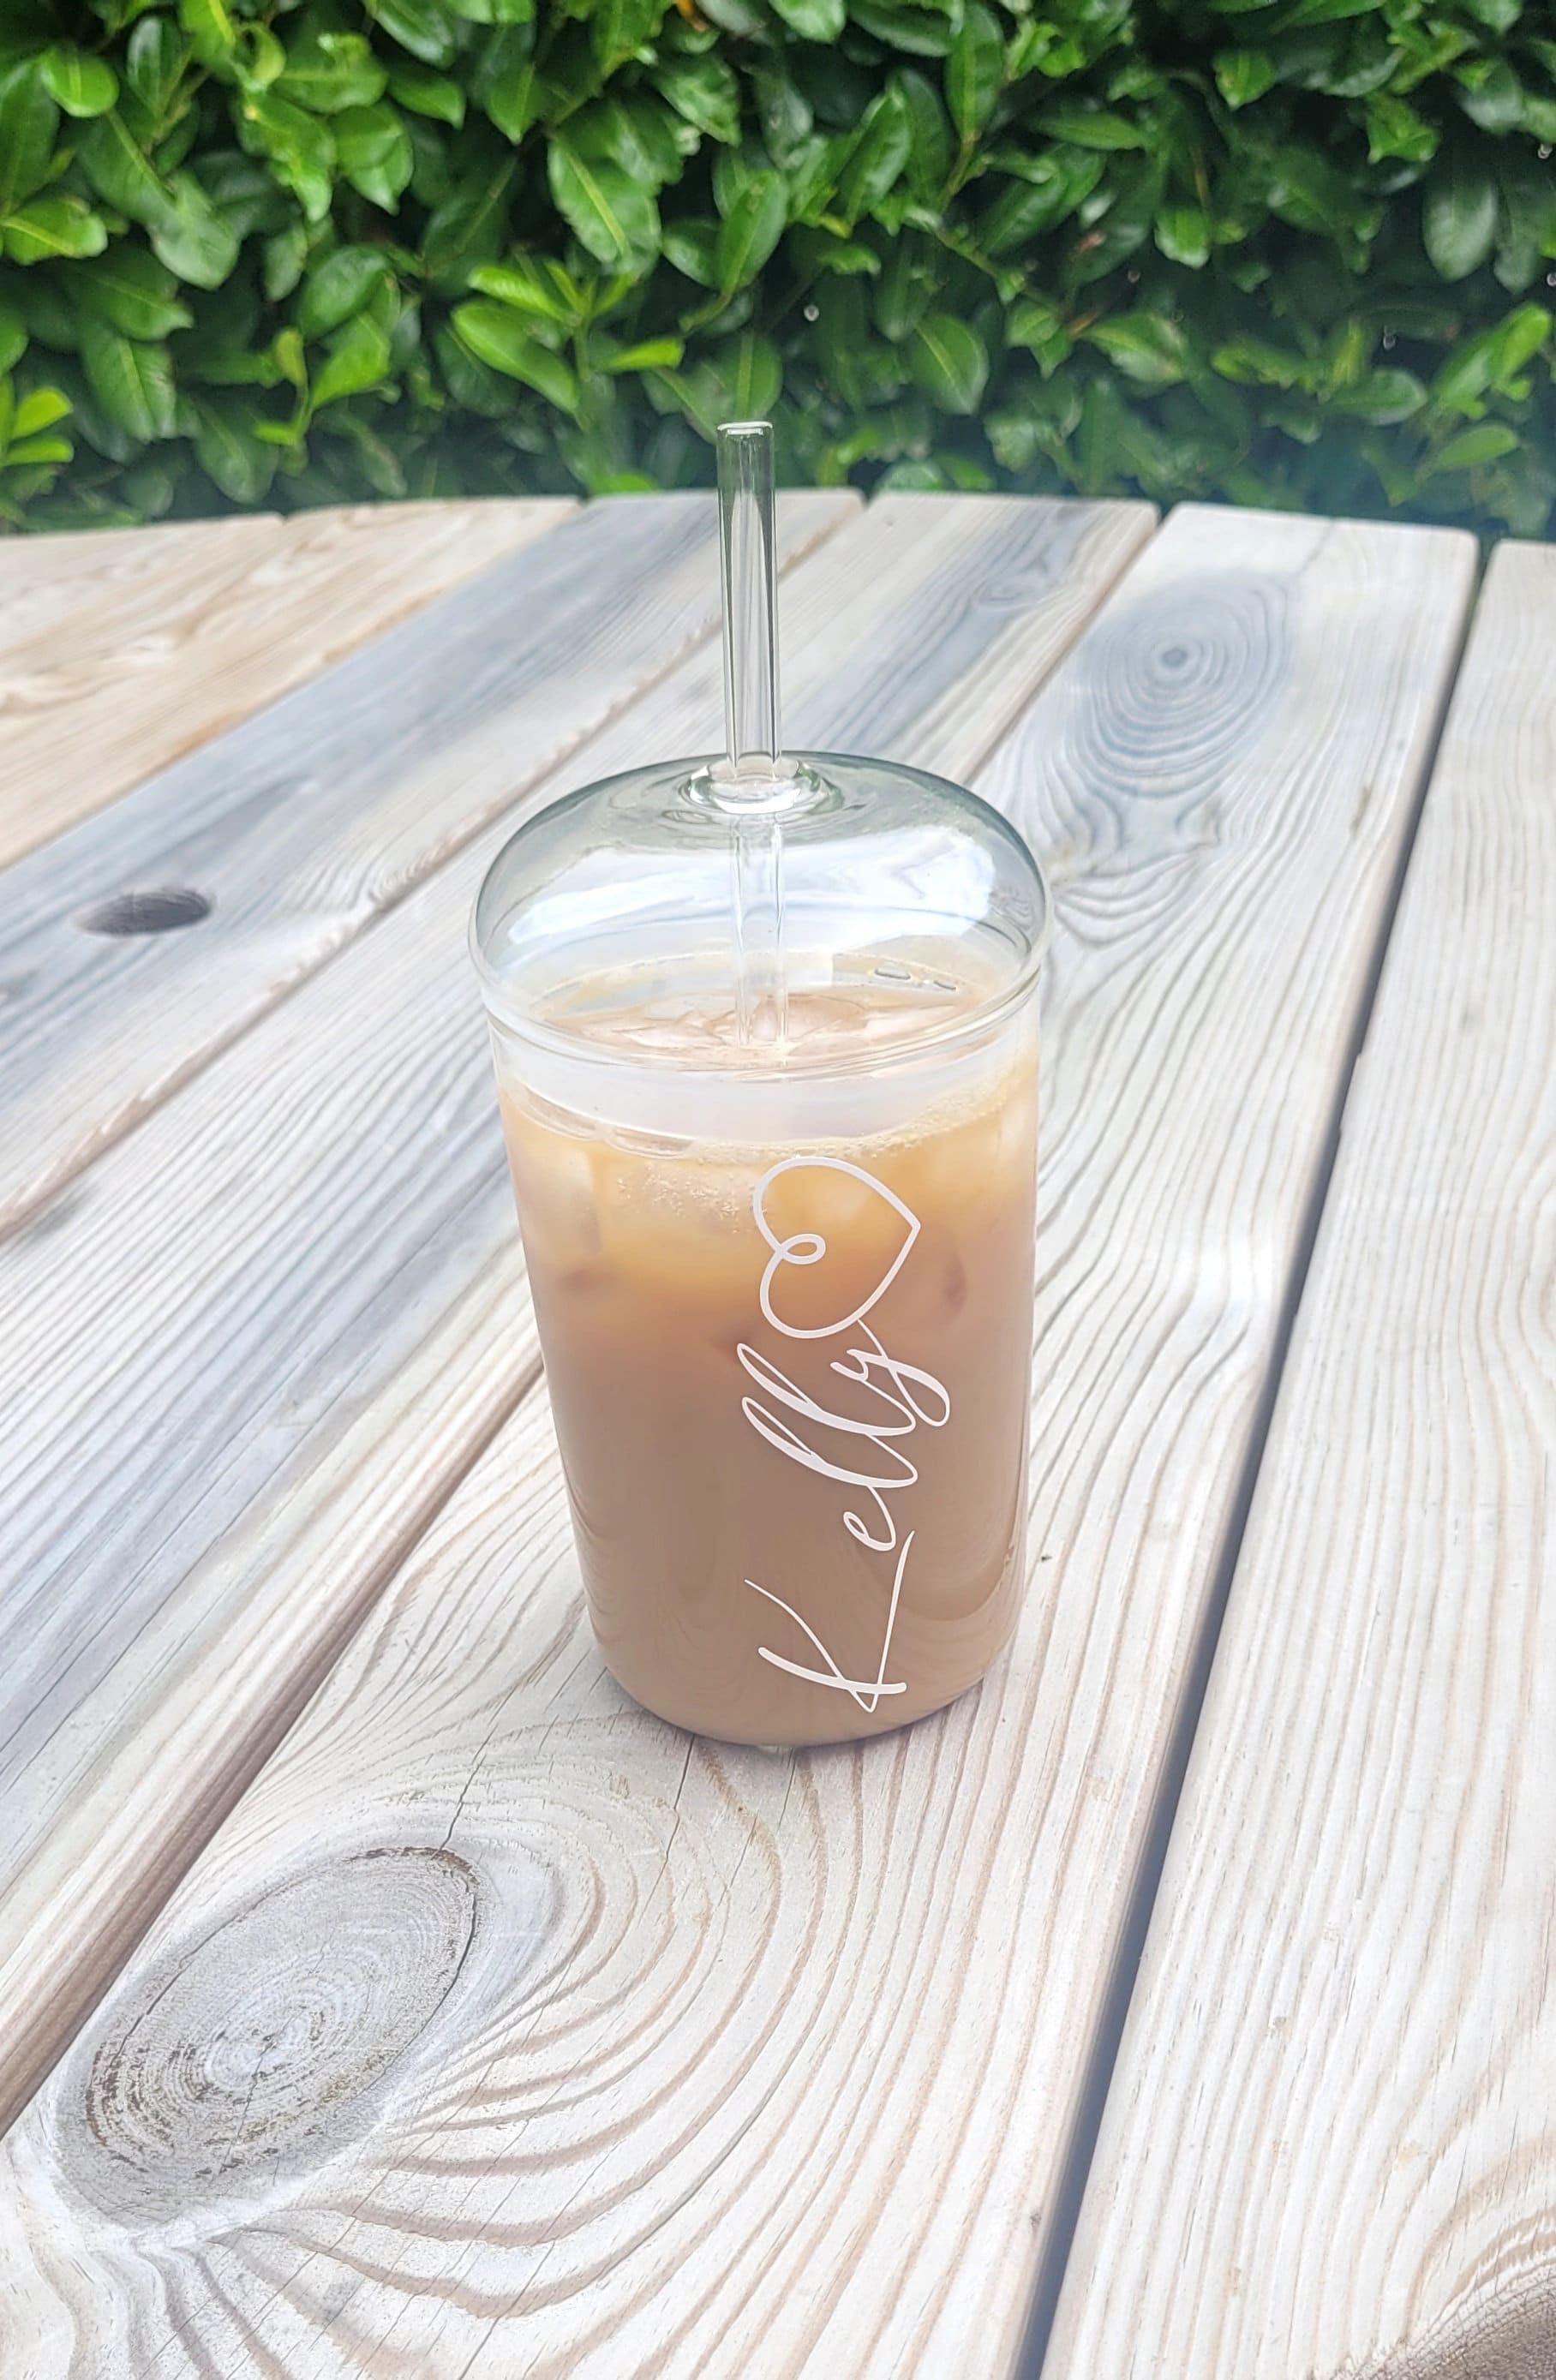 Maplefield Glass Tumbler with Dome Lid for Frappes, Smoothies & Iced Coffee  - Dishwasher Safe Glass …See more Maplefield Glass Tumbler with Dome Lid